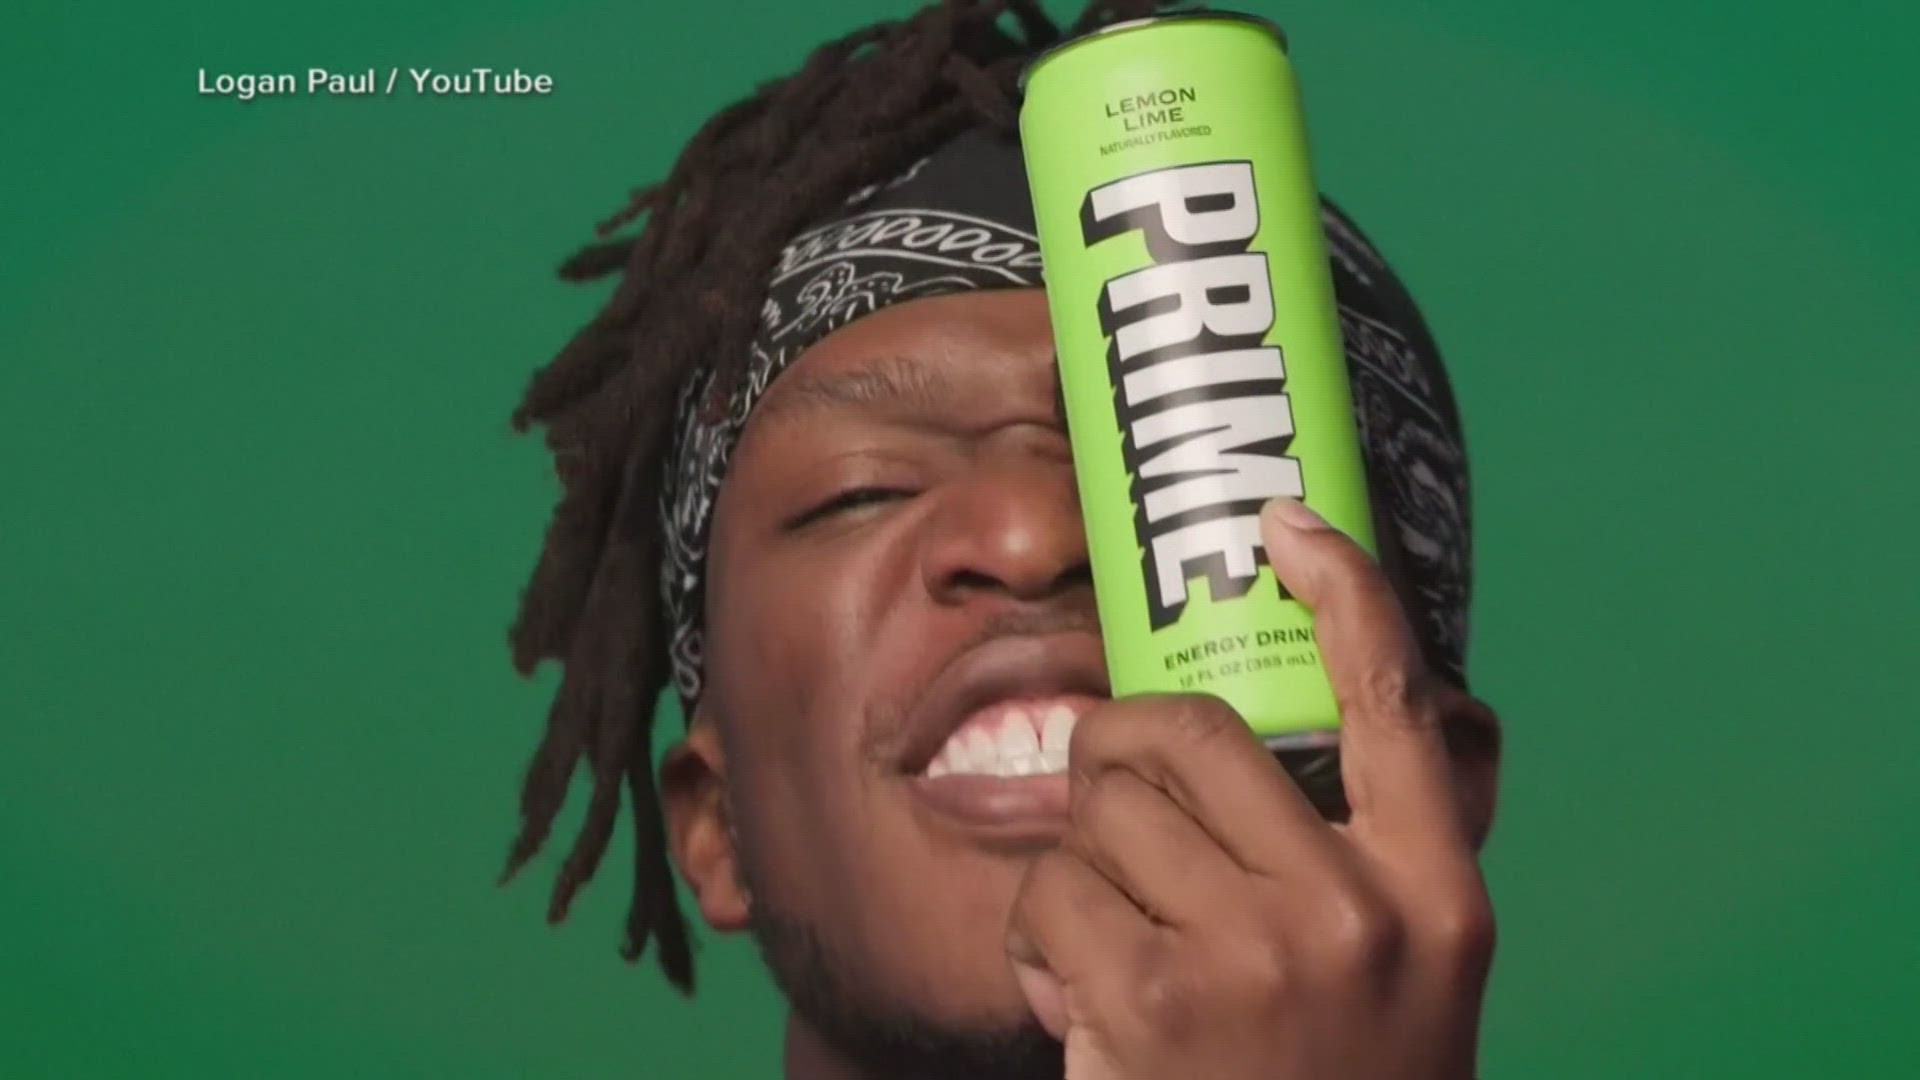 The beverage brand founded by the YouTube stars Logan Paul and KSI that has become something of an obsession among the influencers’ legions of young followers.